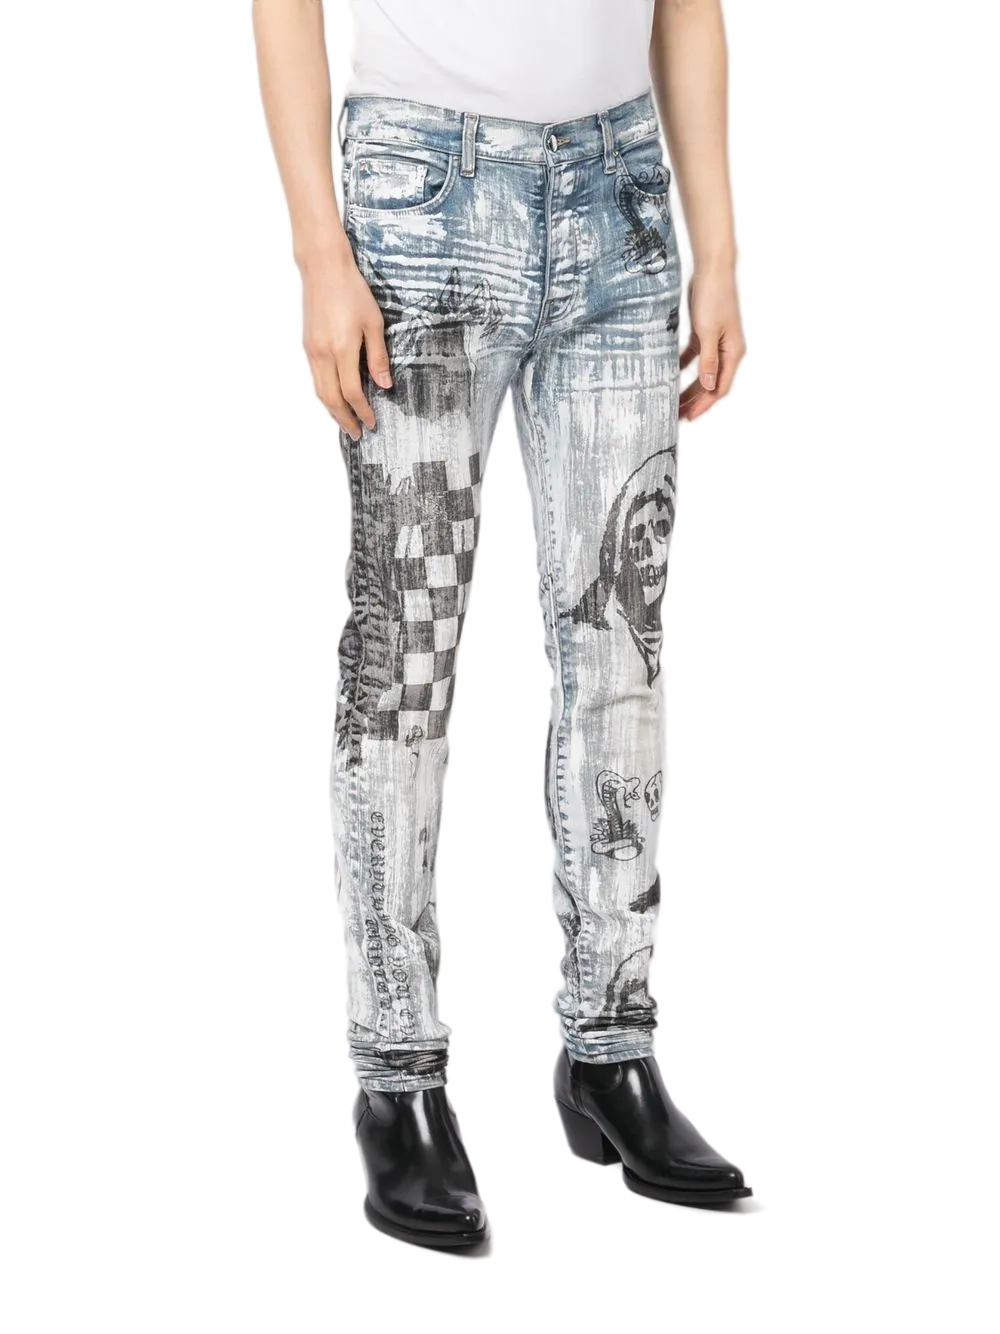 Amiri - Wes Lang Graphic - Print Skinny Jeans ⋆ LONDINY